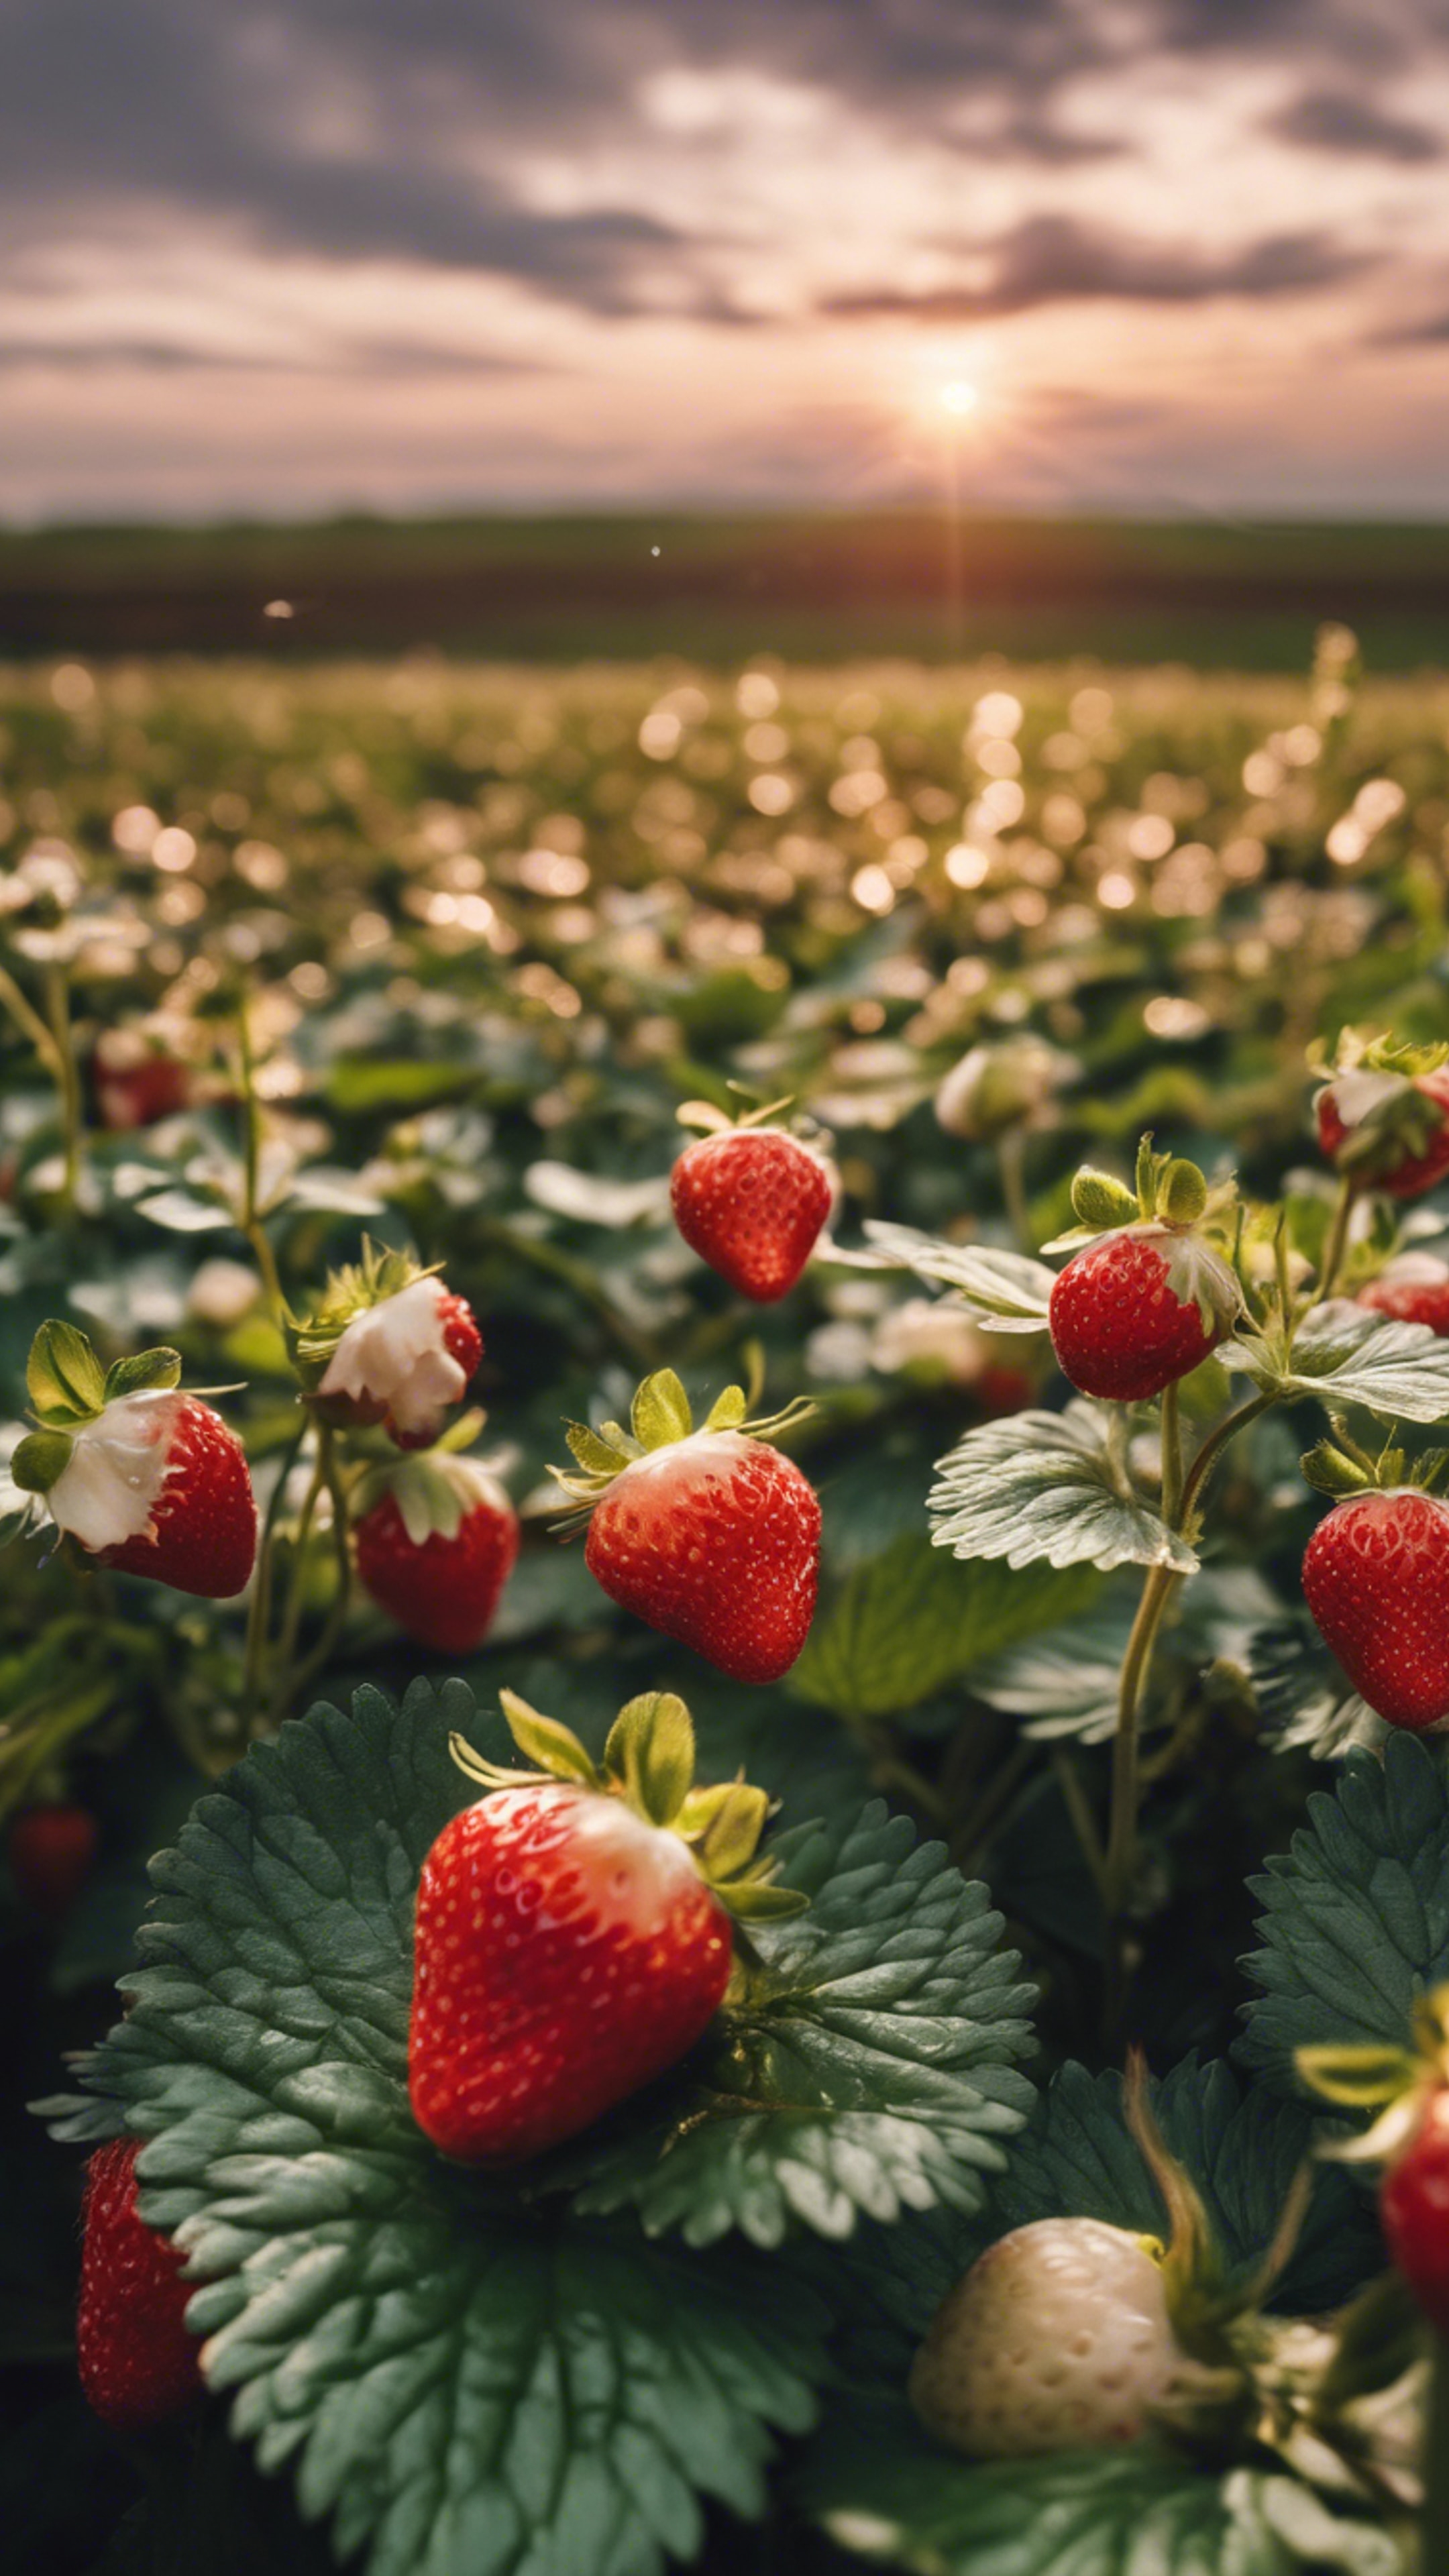 A romantic sunset view over a field of blooming strawberry plants. Тапет[3adde1a5bf4e4528ba85]